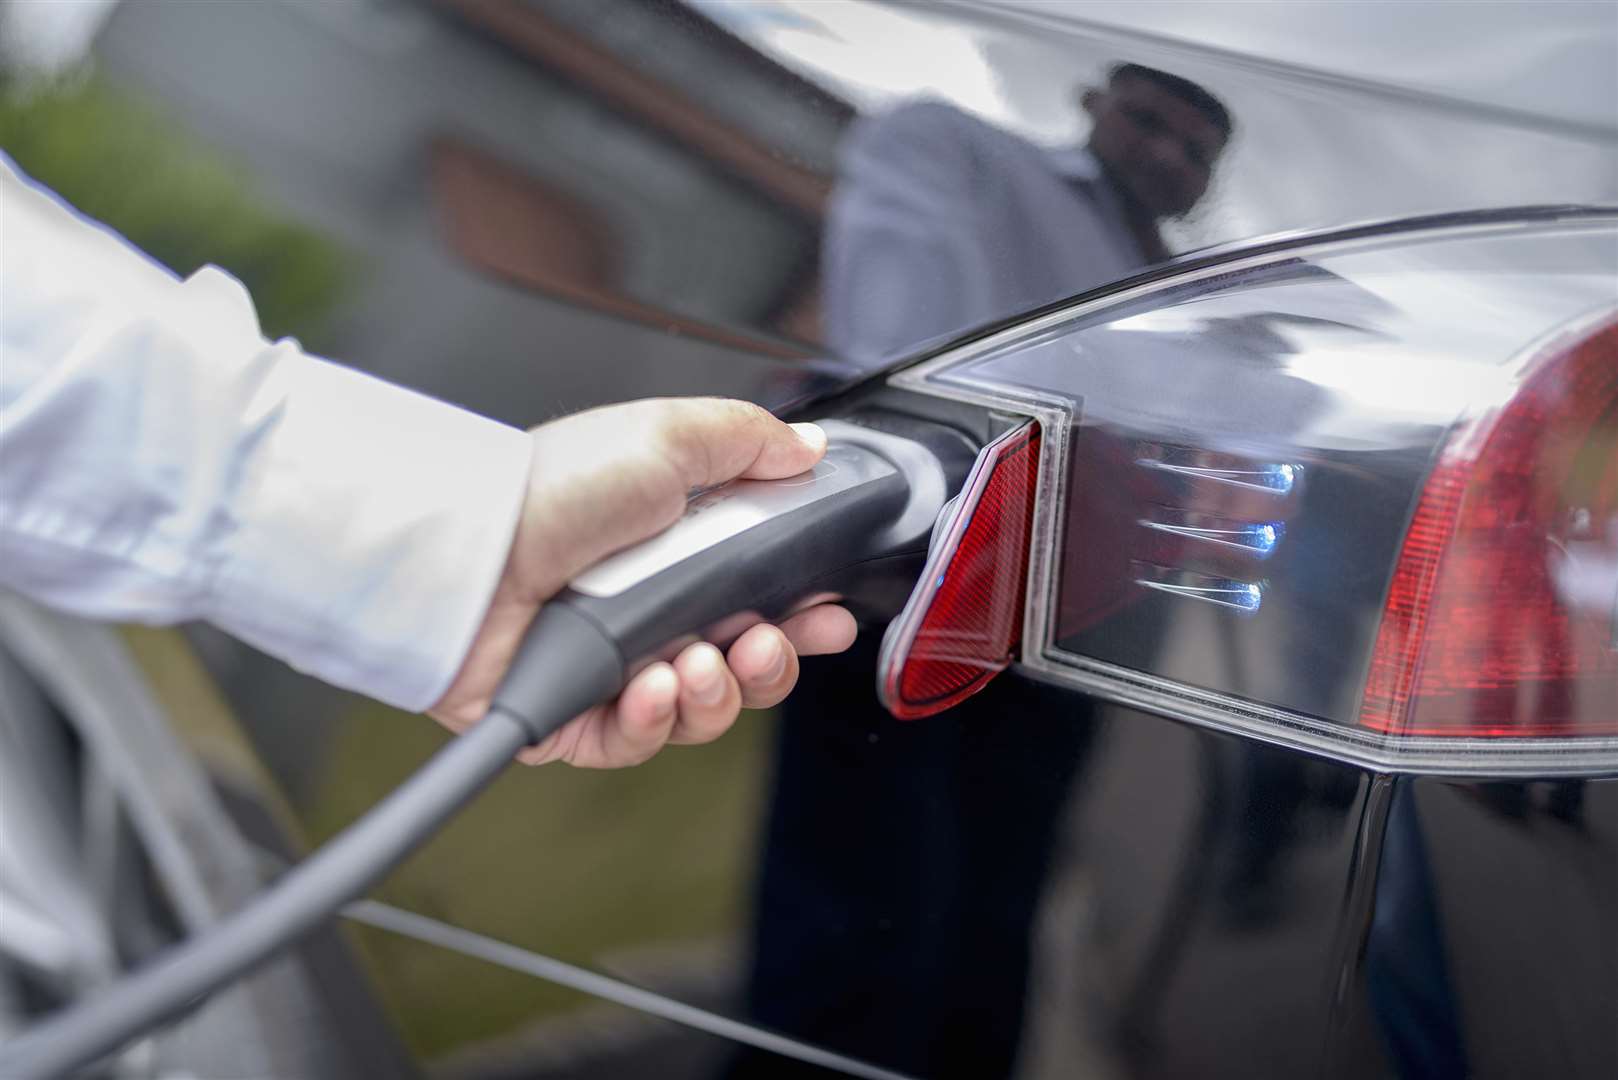 Caithness-based ATME is leading a project to create more efficient batteries for electric vehicles.